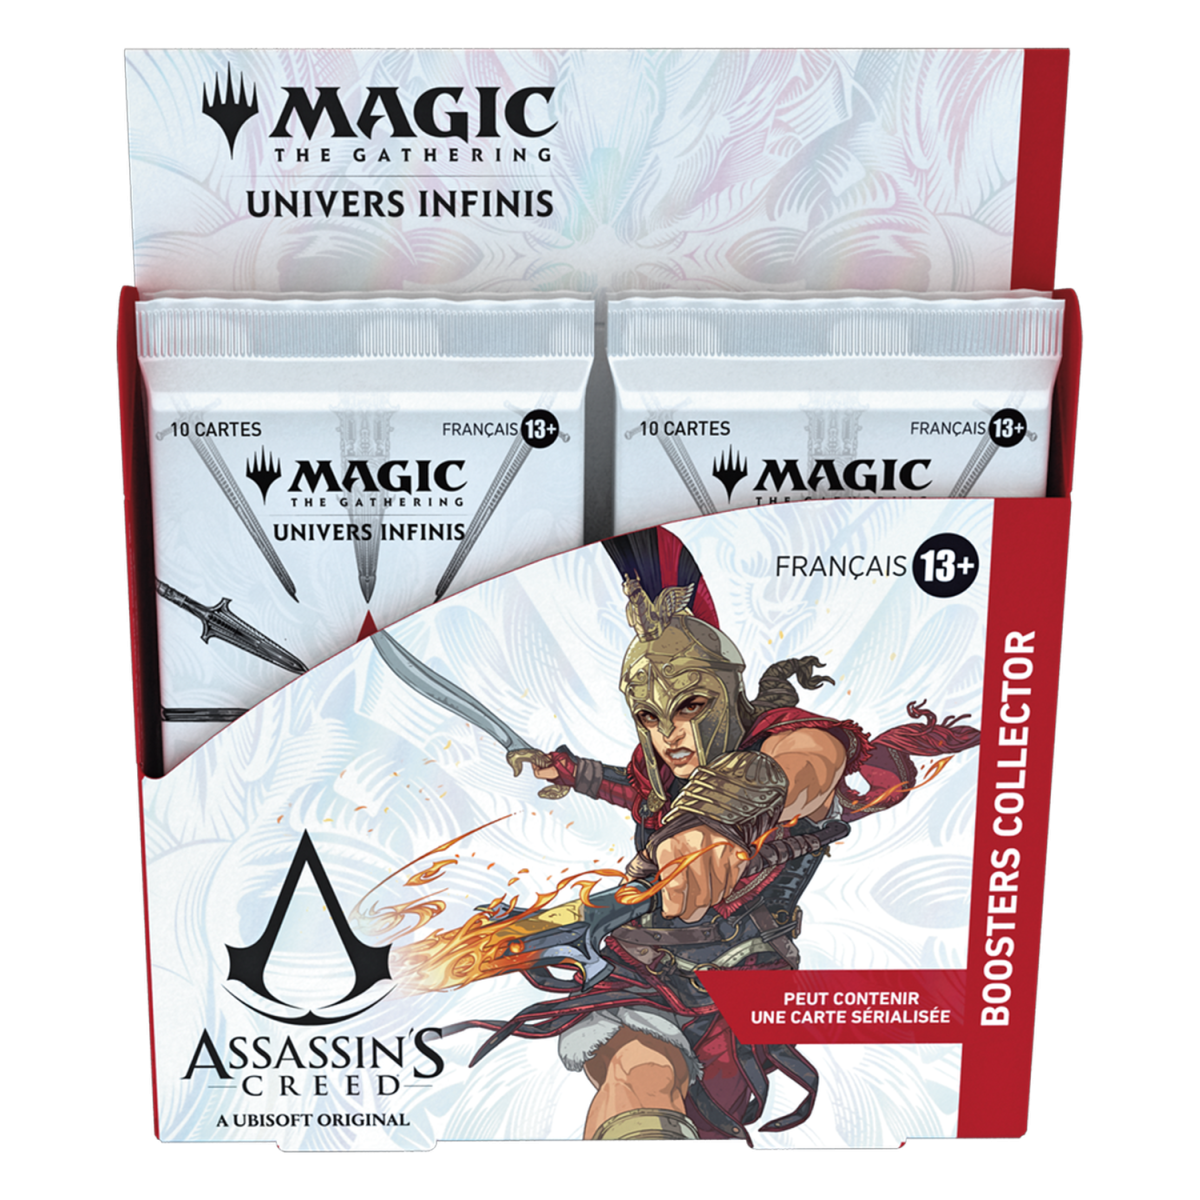 Item MTG - Boîte de 12 Boosters - Collector - Assassin's Creed - Univers Infinis - AC -FR